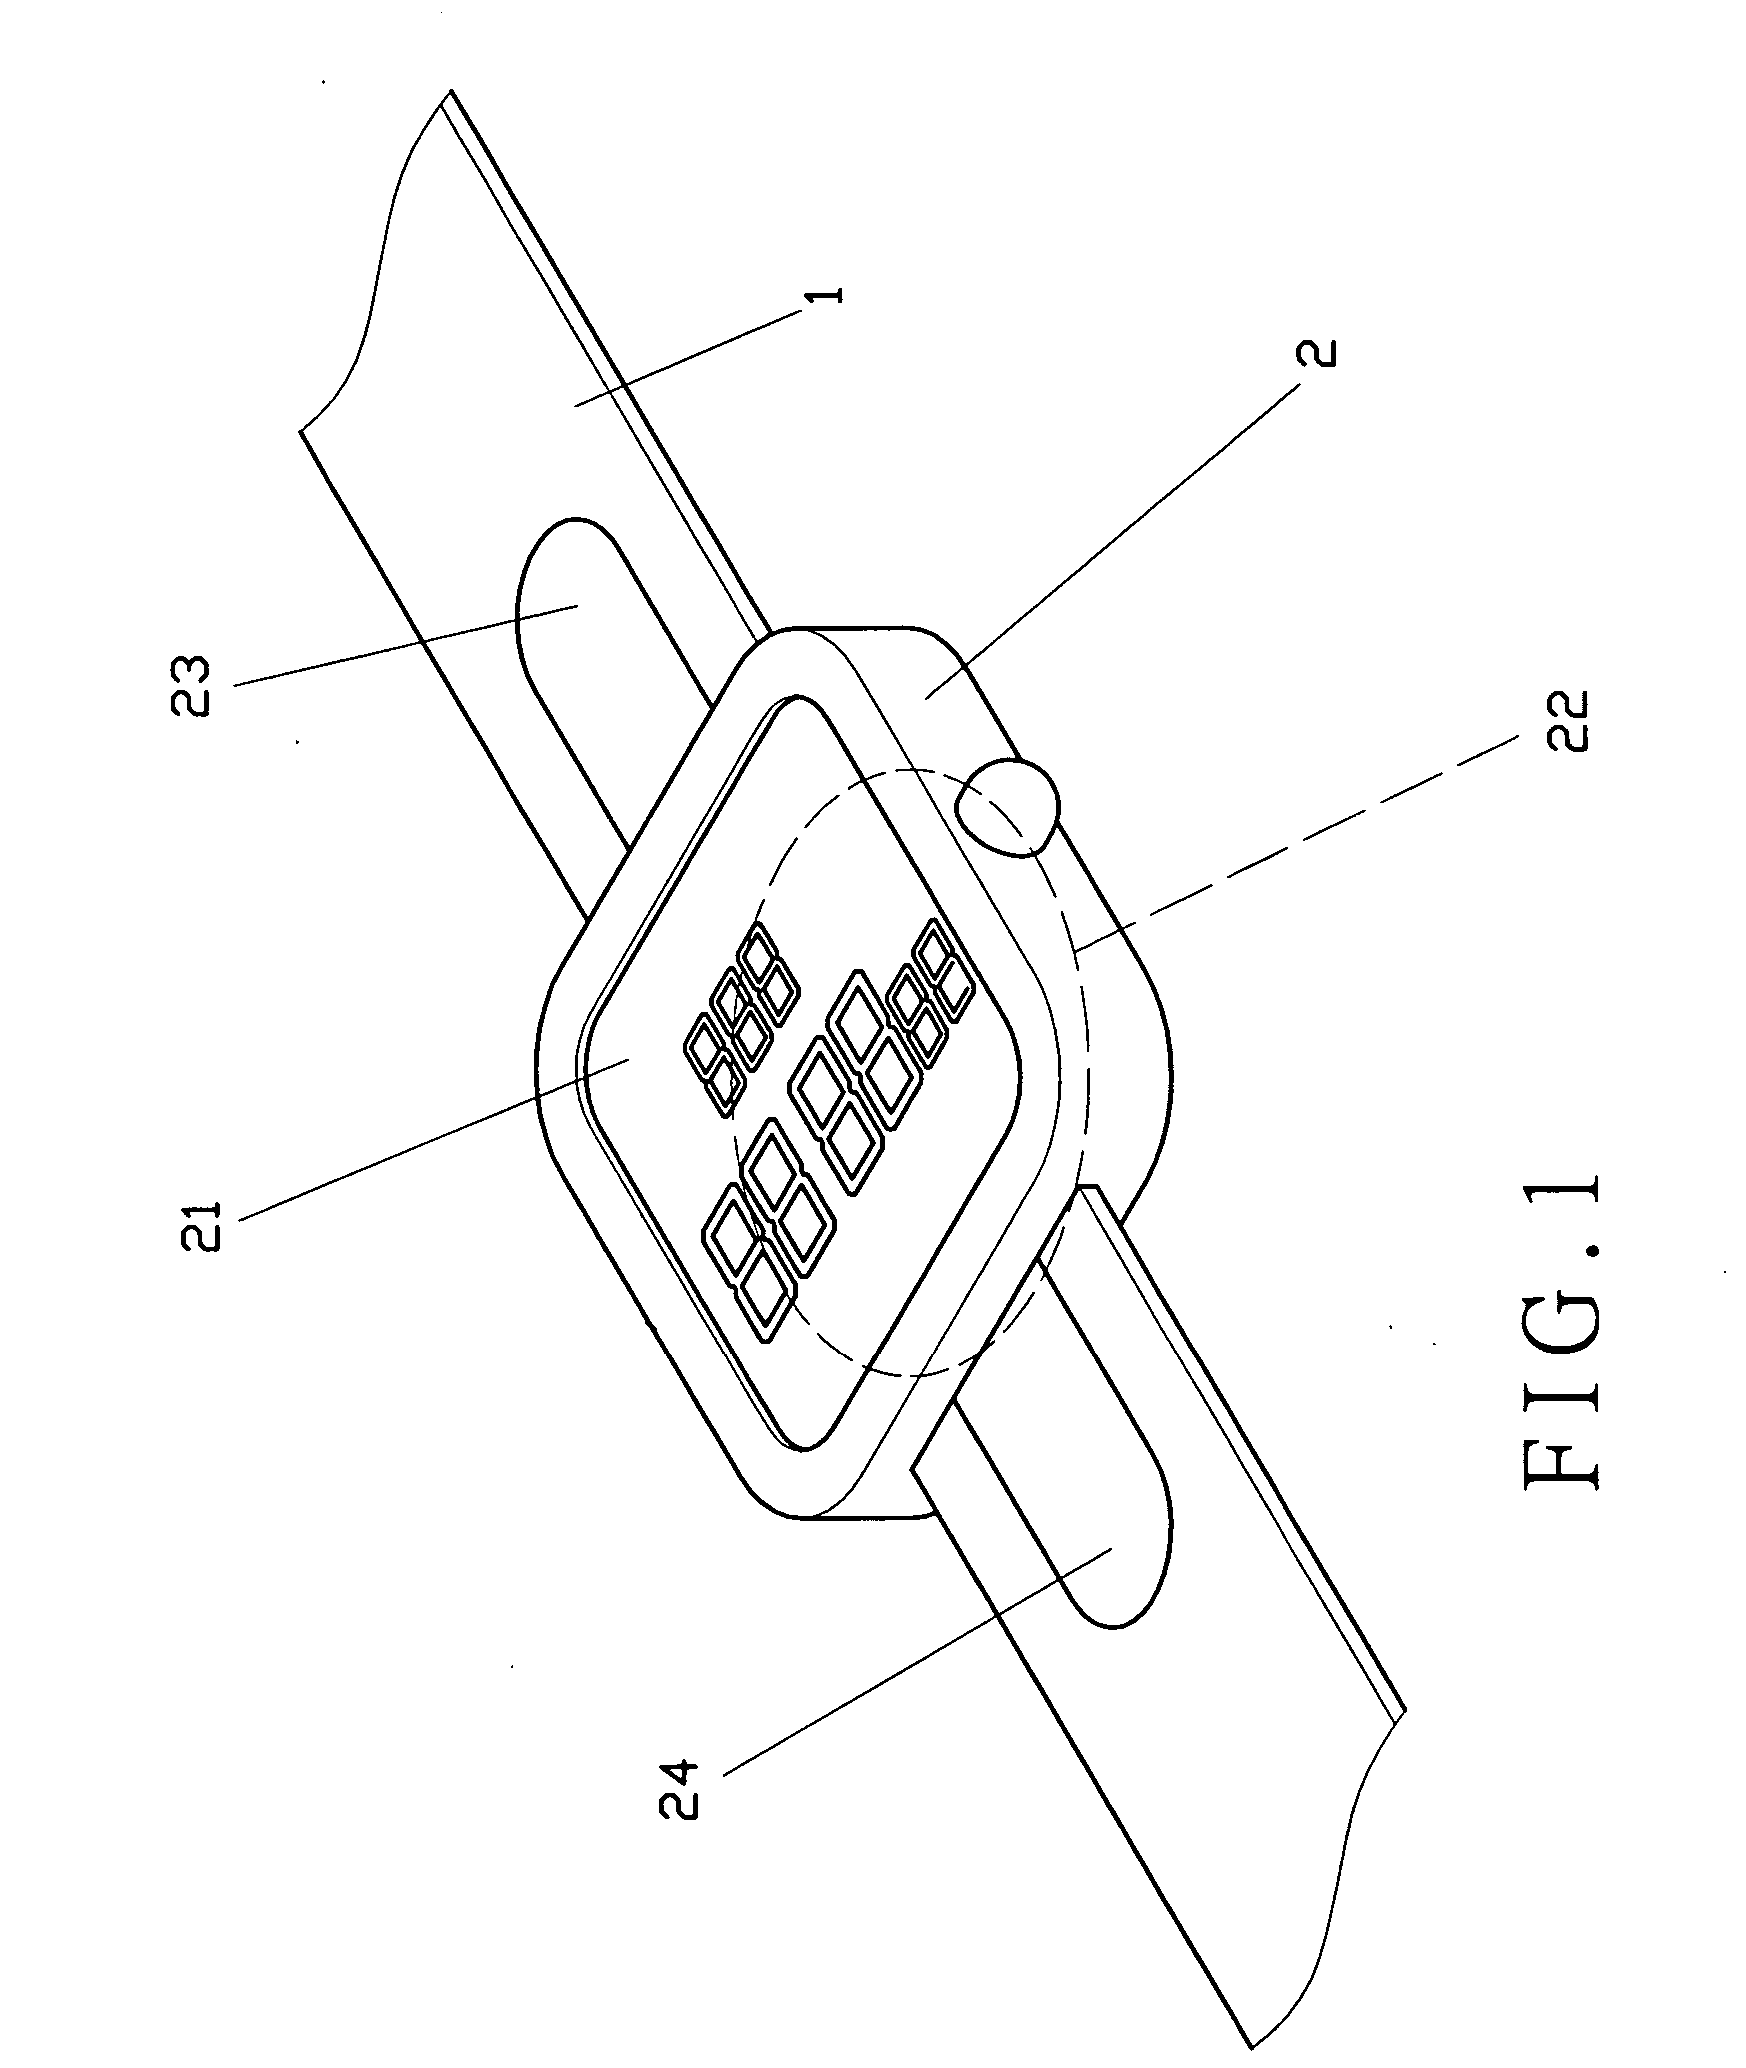 Wrist-worn monitor for heartbeat detection